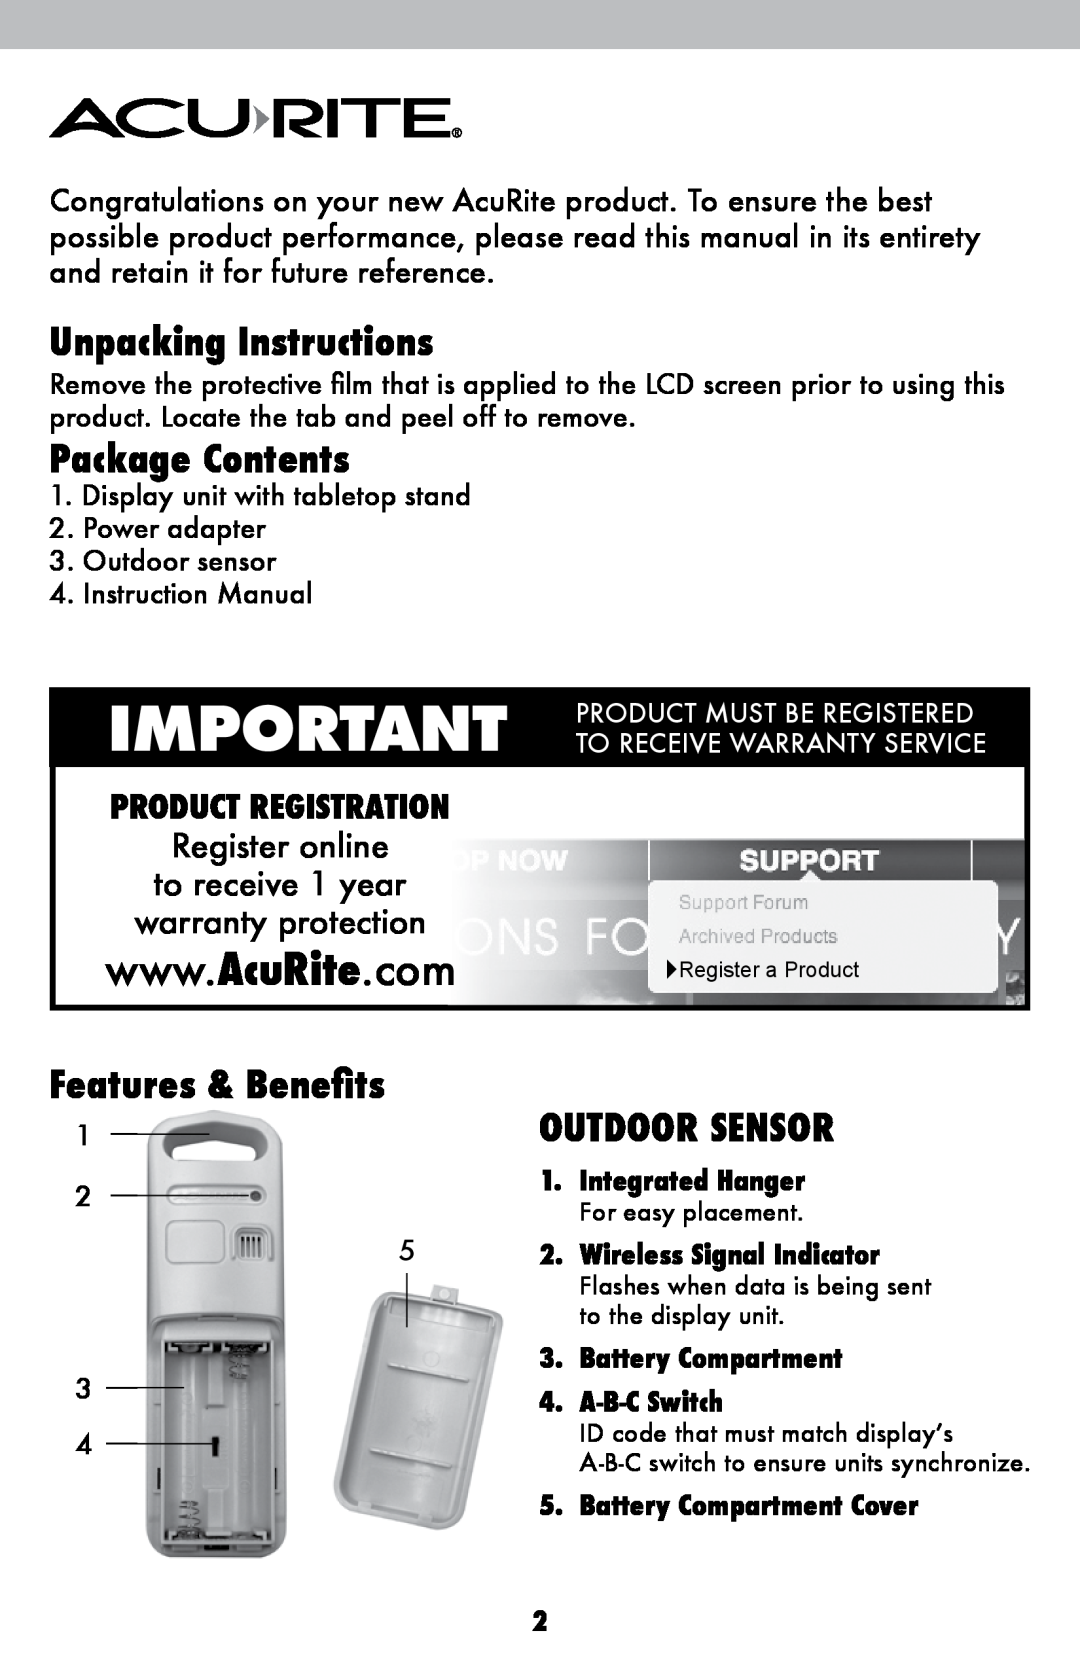 Acu-Rite 2008 Unpacking Instructions, Package Contents, Outdoor Sensor, Product Must Be Registered, Features & Benefits 